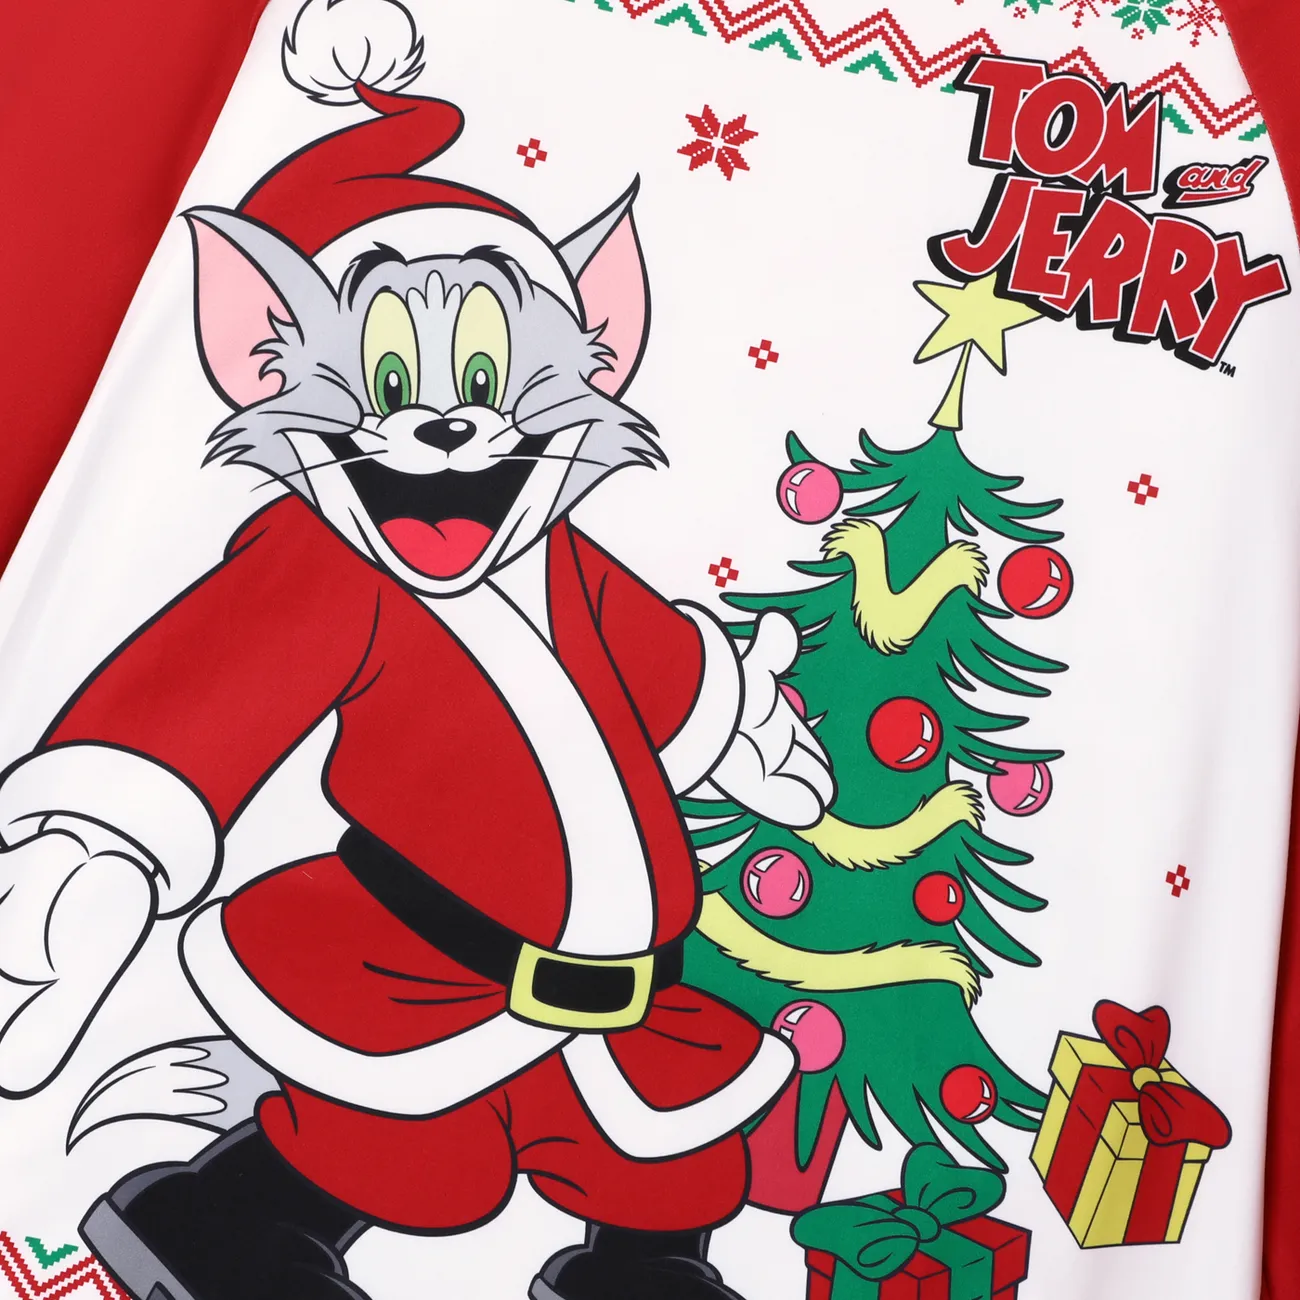 Tom and Jerry Family Matching Joyly Christmas Character Print Pajamas Sets (Flame Resistant) Red big image 1